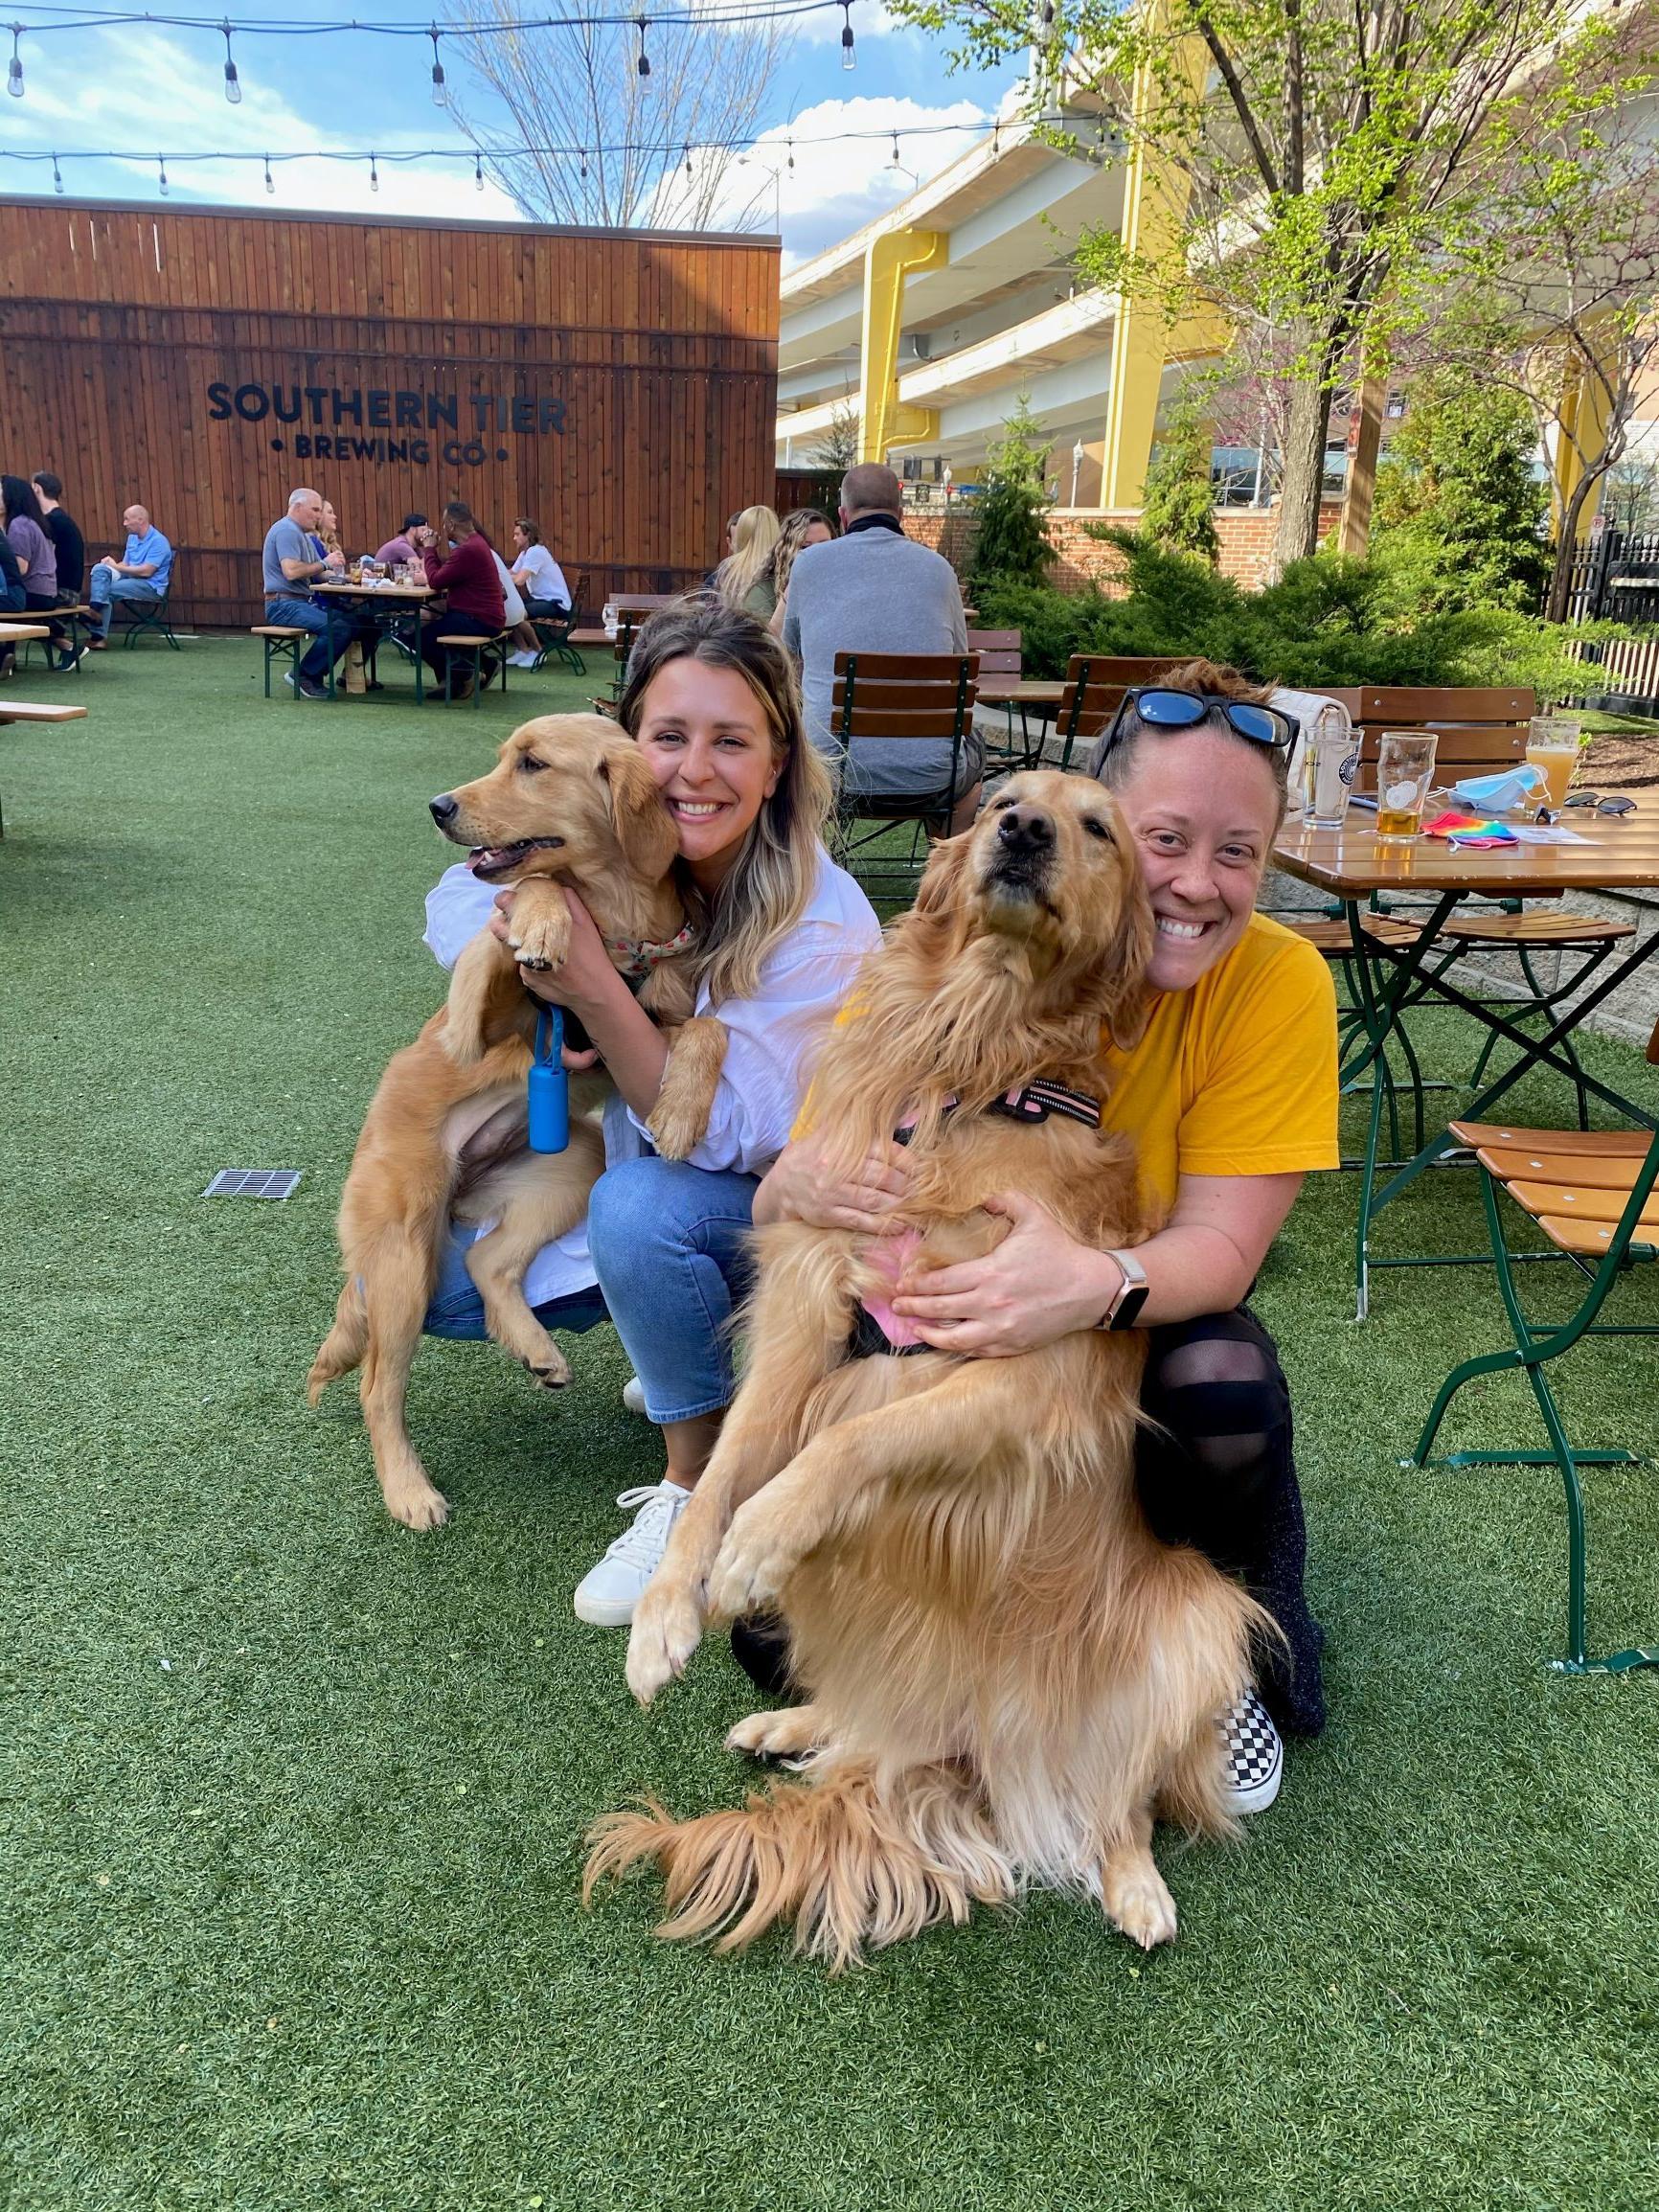 Pet Friendly Southern Tier Brewing Company